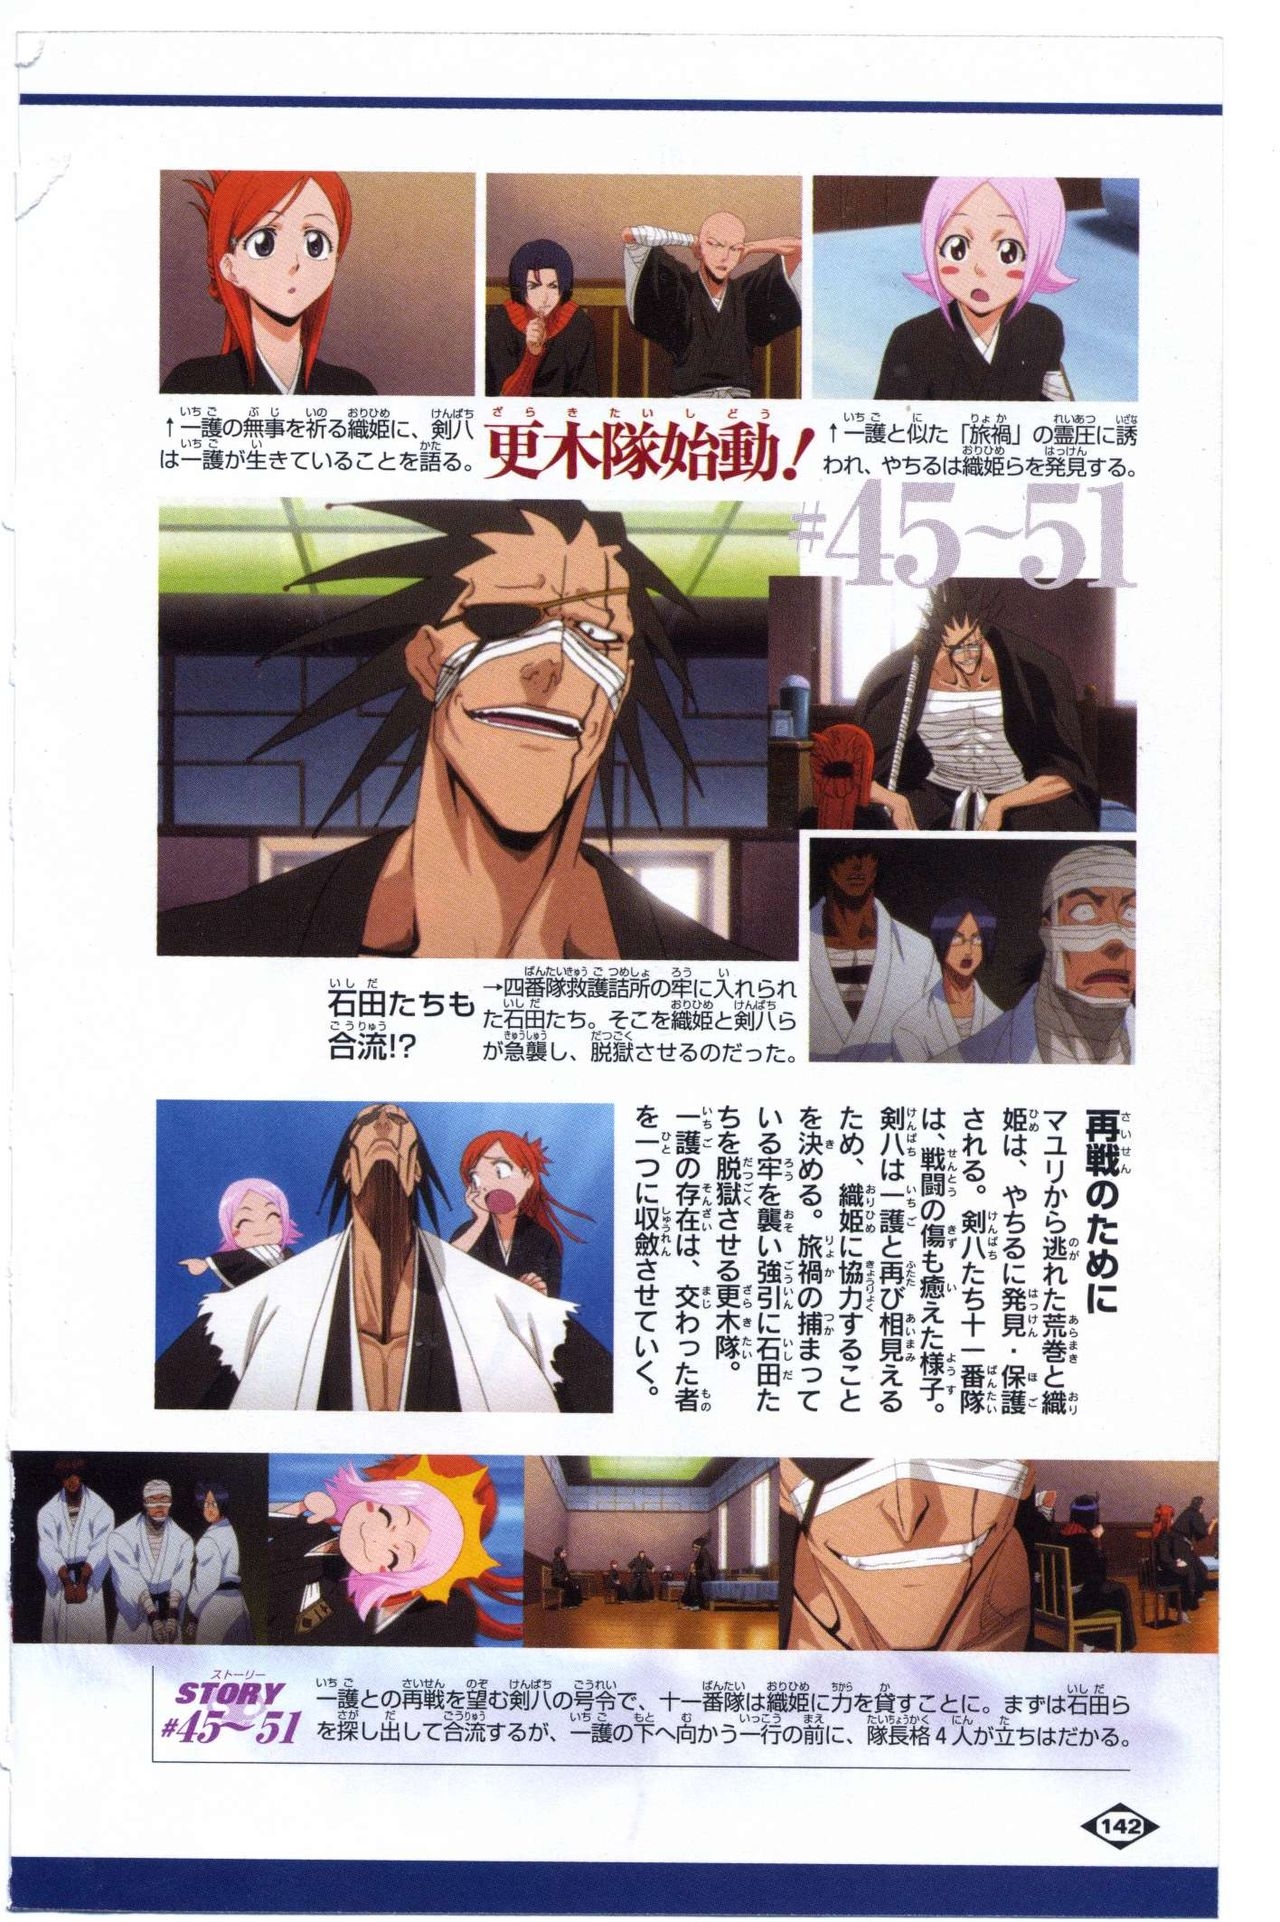 Bleach: Official Animation Book VIBEs 142